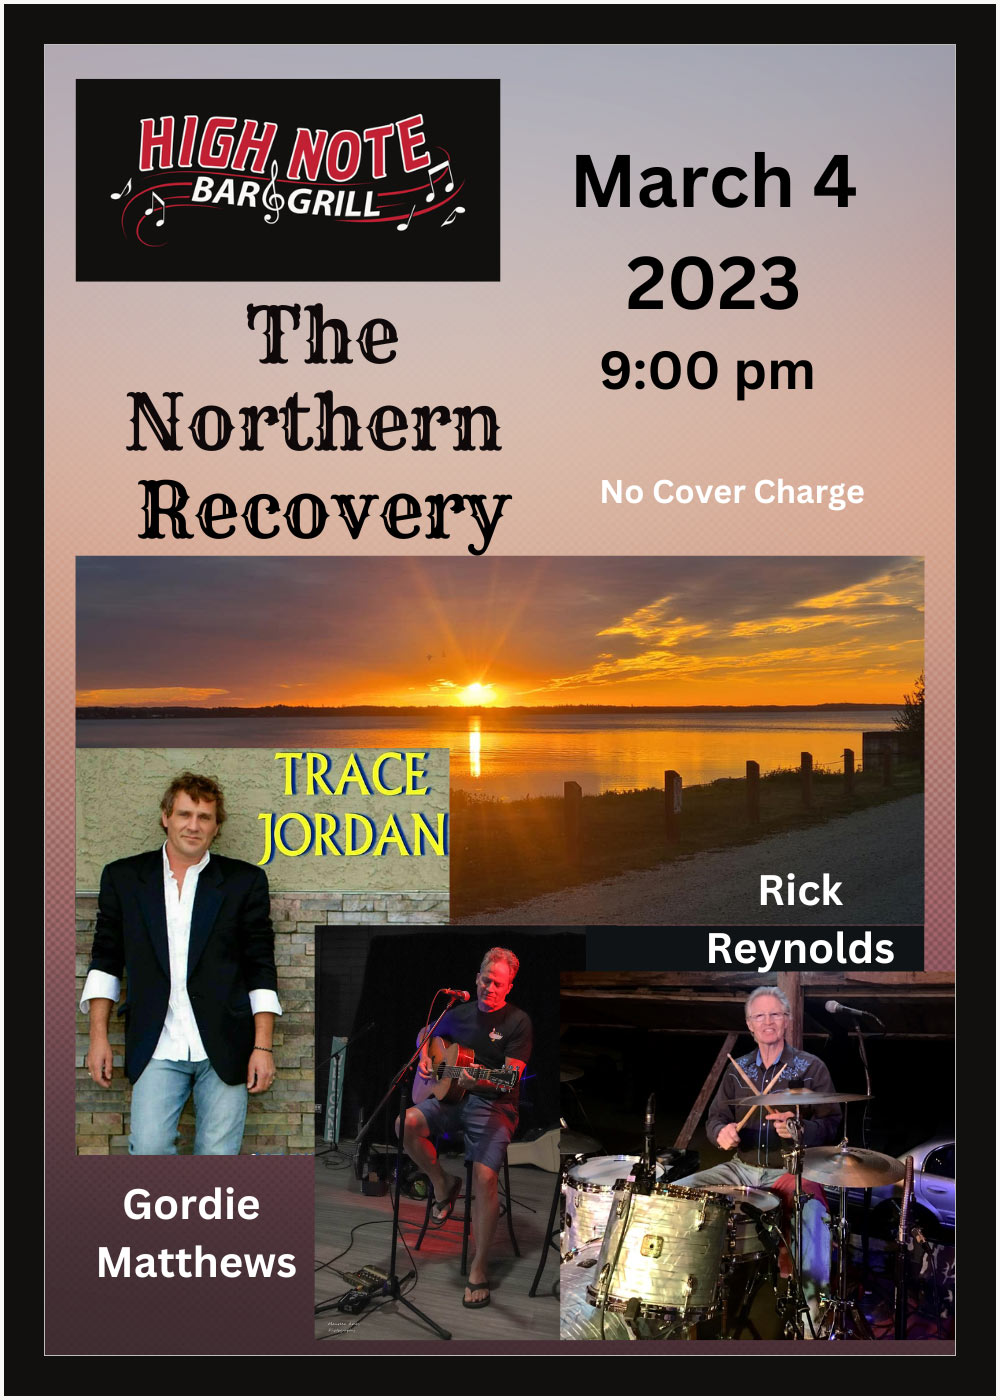 High Note Bar & Grill - The Northern Recovery Band